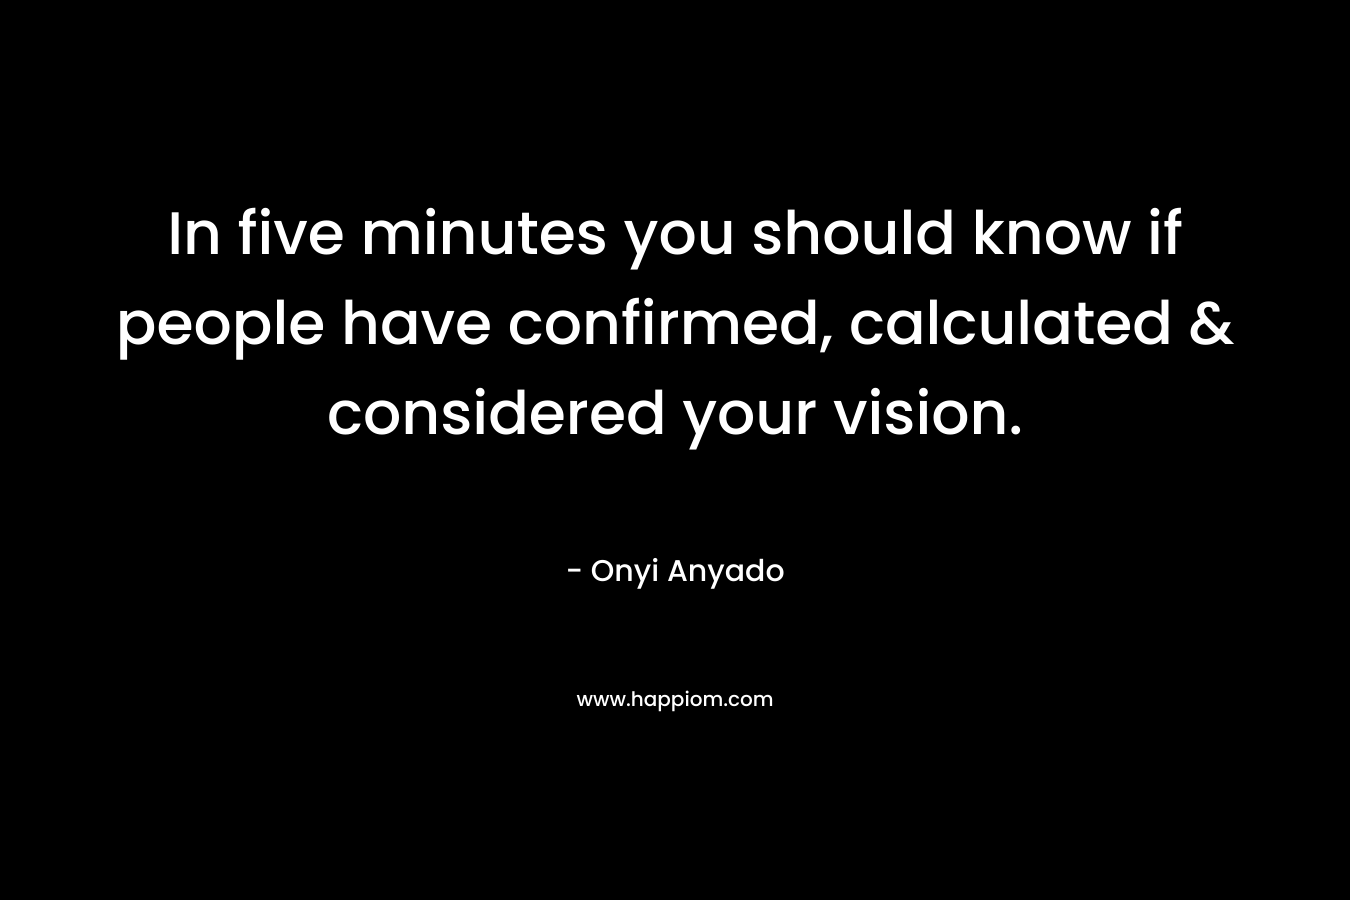 In five minutes you should know if people have confirmed, calculated & considered your vision. – Onyi Anyado